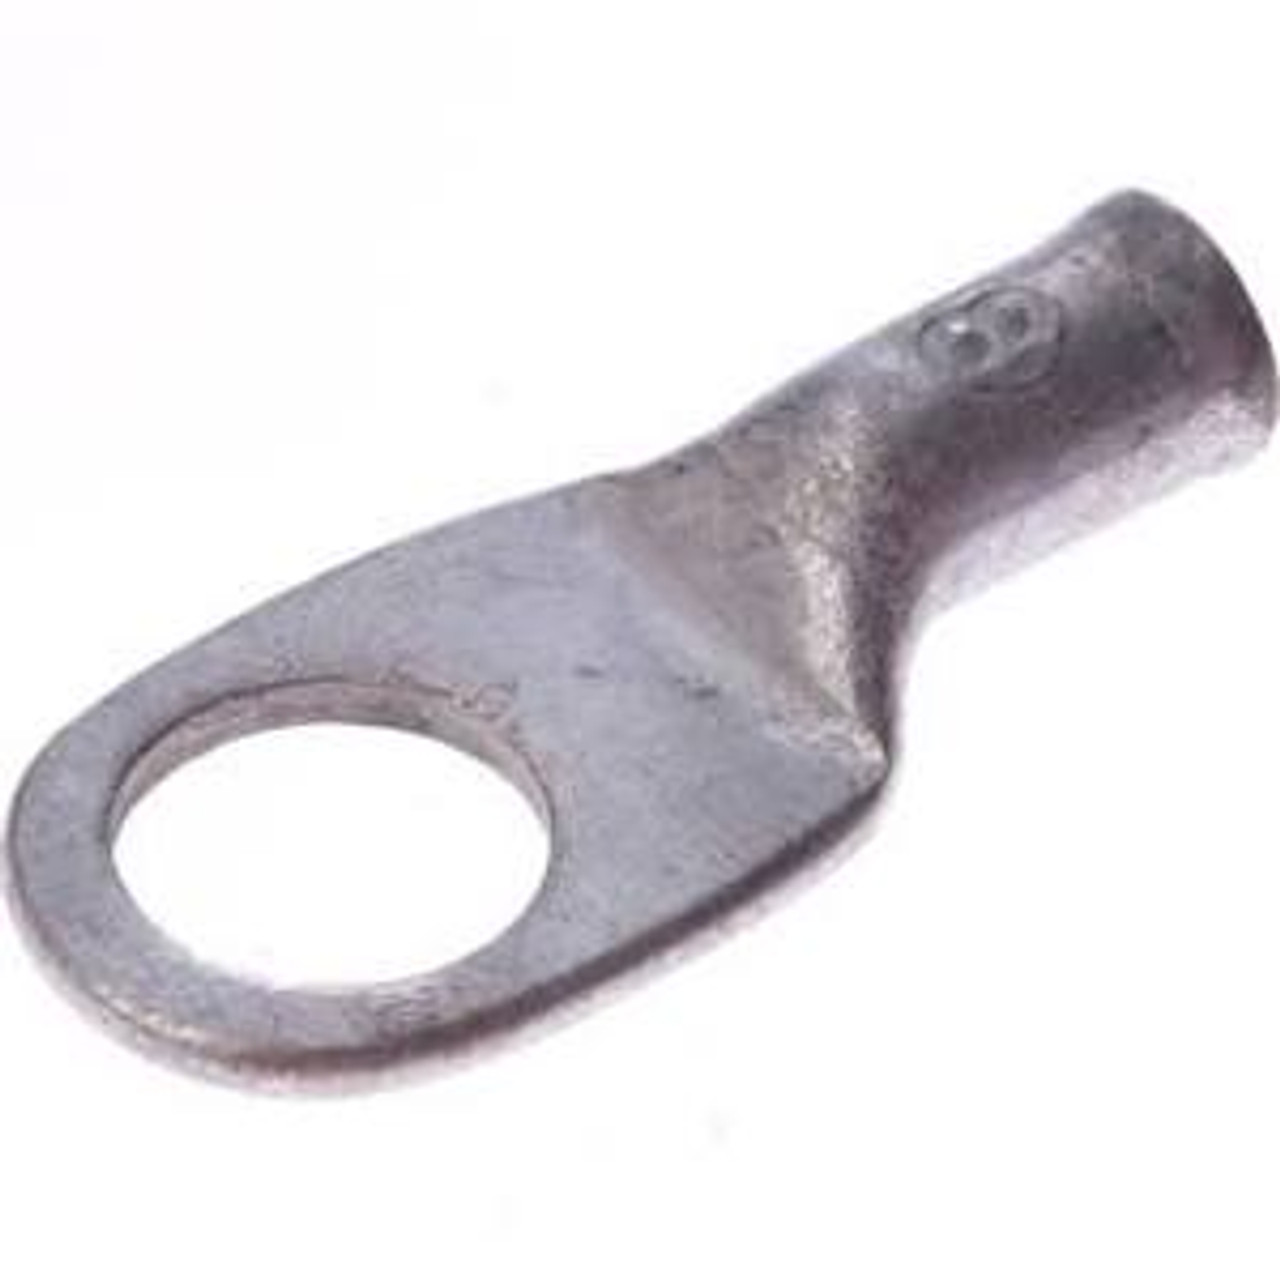 Closed Lug 3/8 Ring Terminal for 8 Gauge Wire